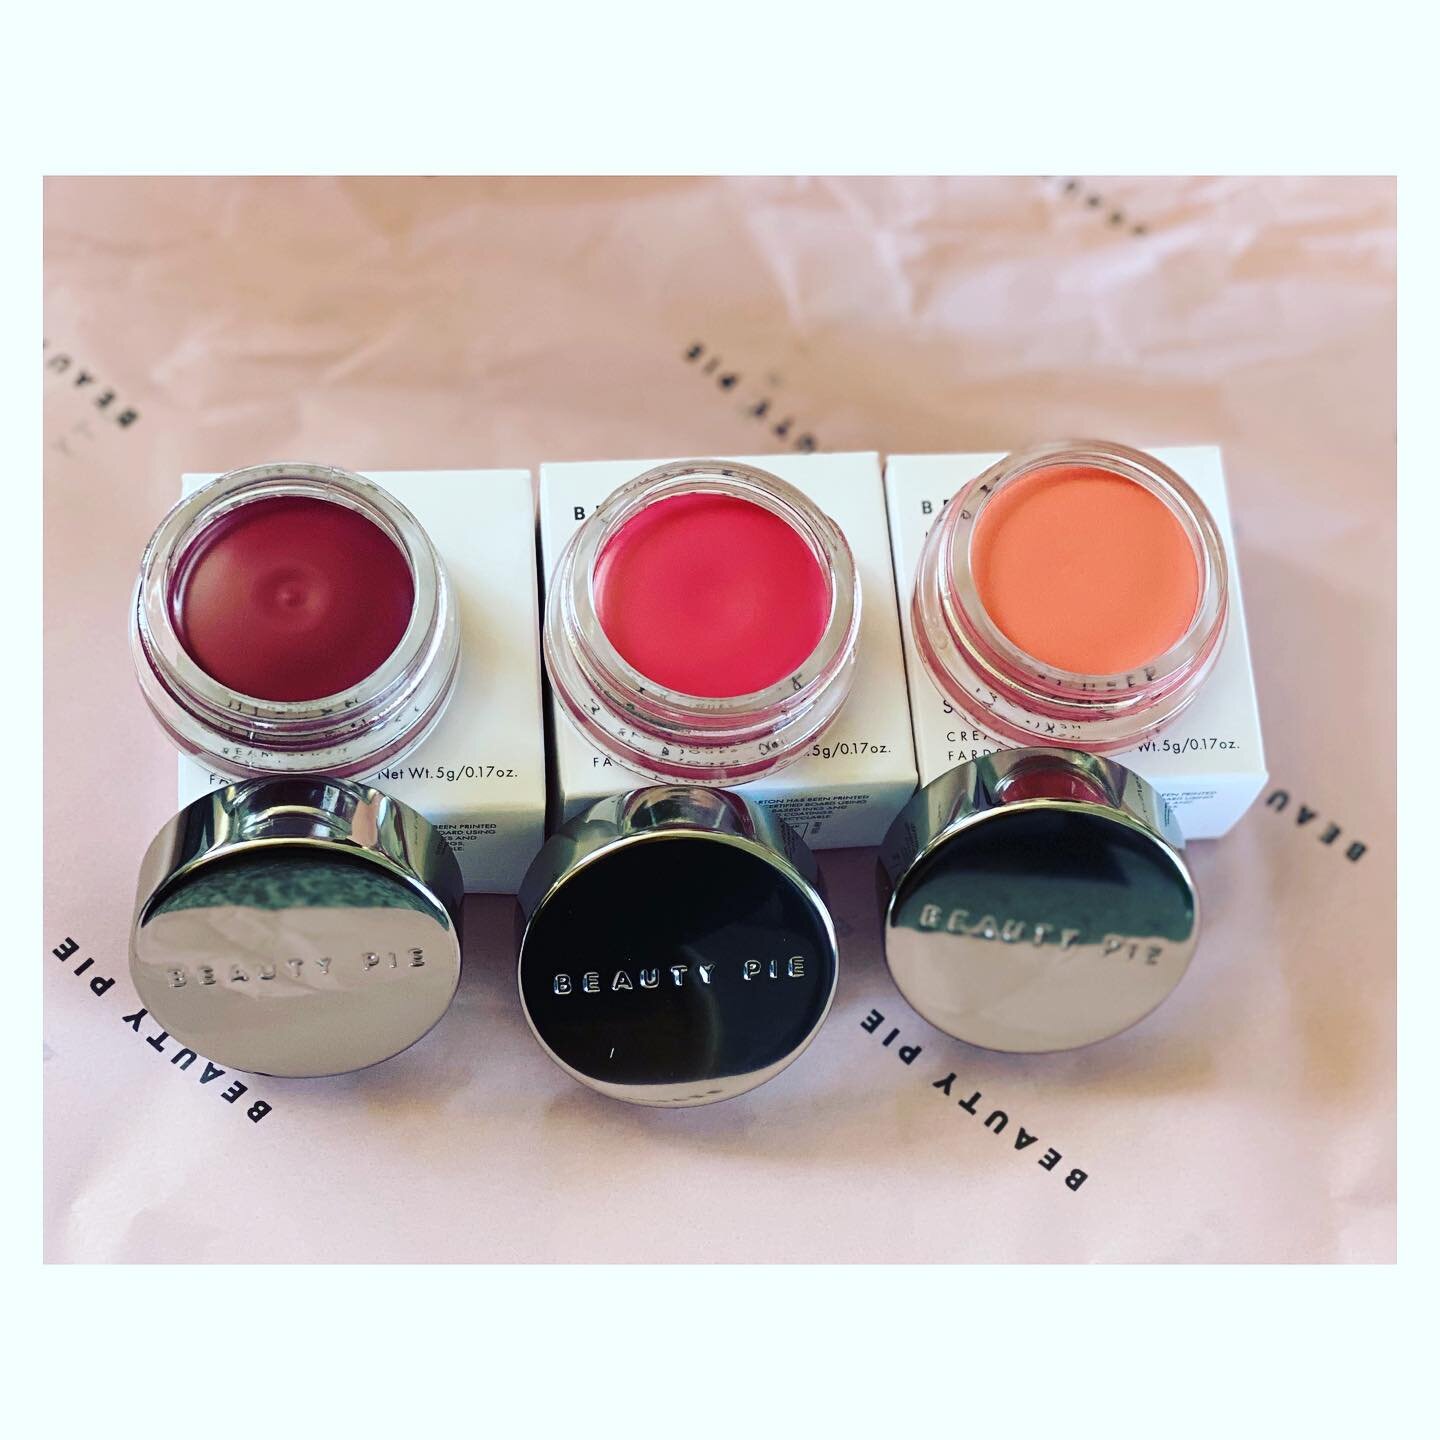 Yay, new goodies for my summer brides 🤍 I  finally got my hands on these for my kit @beautypie cream blushes created by the wonderful @hannahmartinmakeup 

Do you prefer cream  blush over  than powder? 
.
.

These are such beautiful products and sui